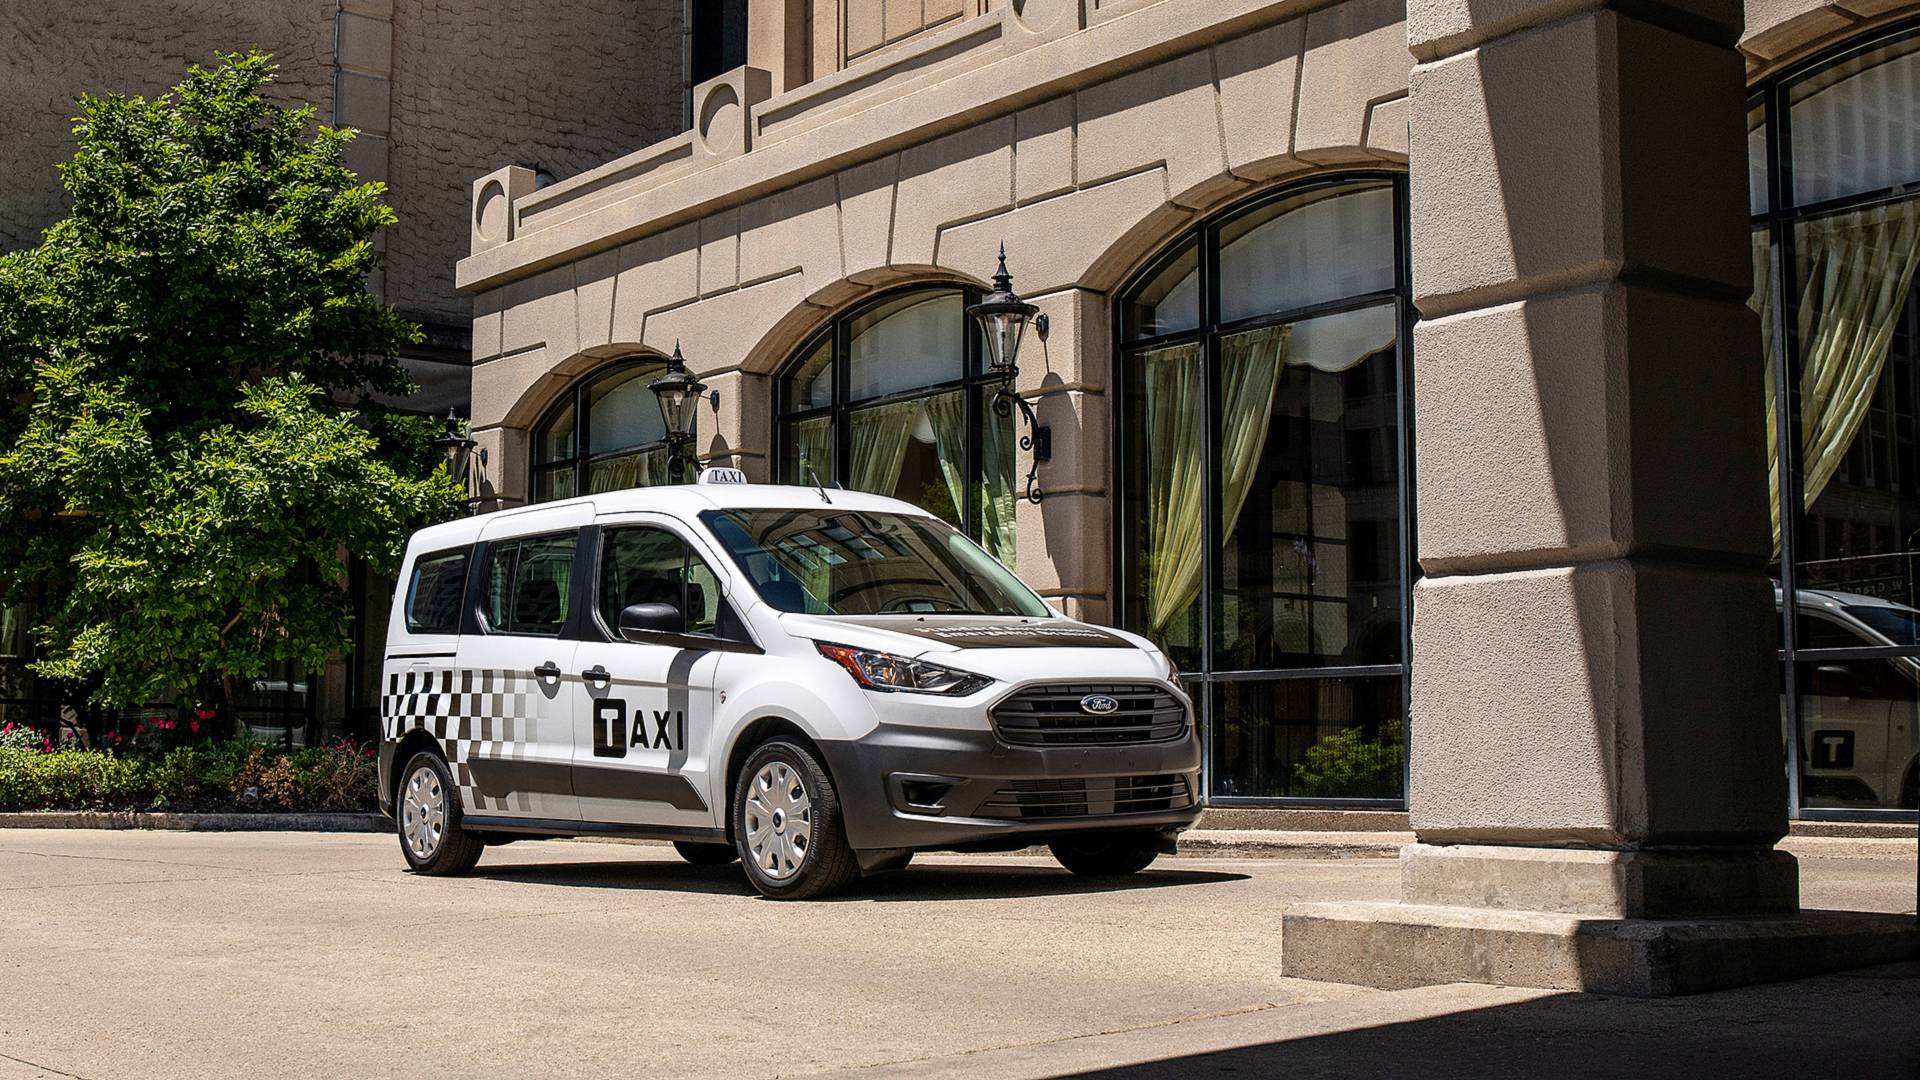 ford-fusion-and-transit-connect-taxi (6).jpg